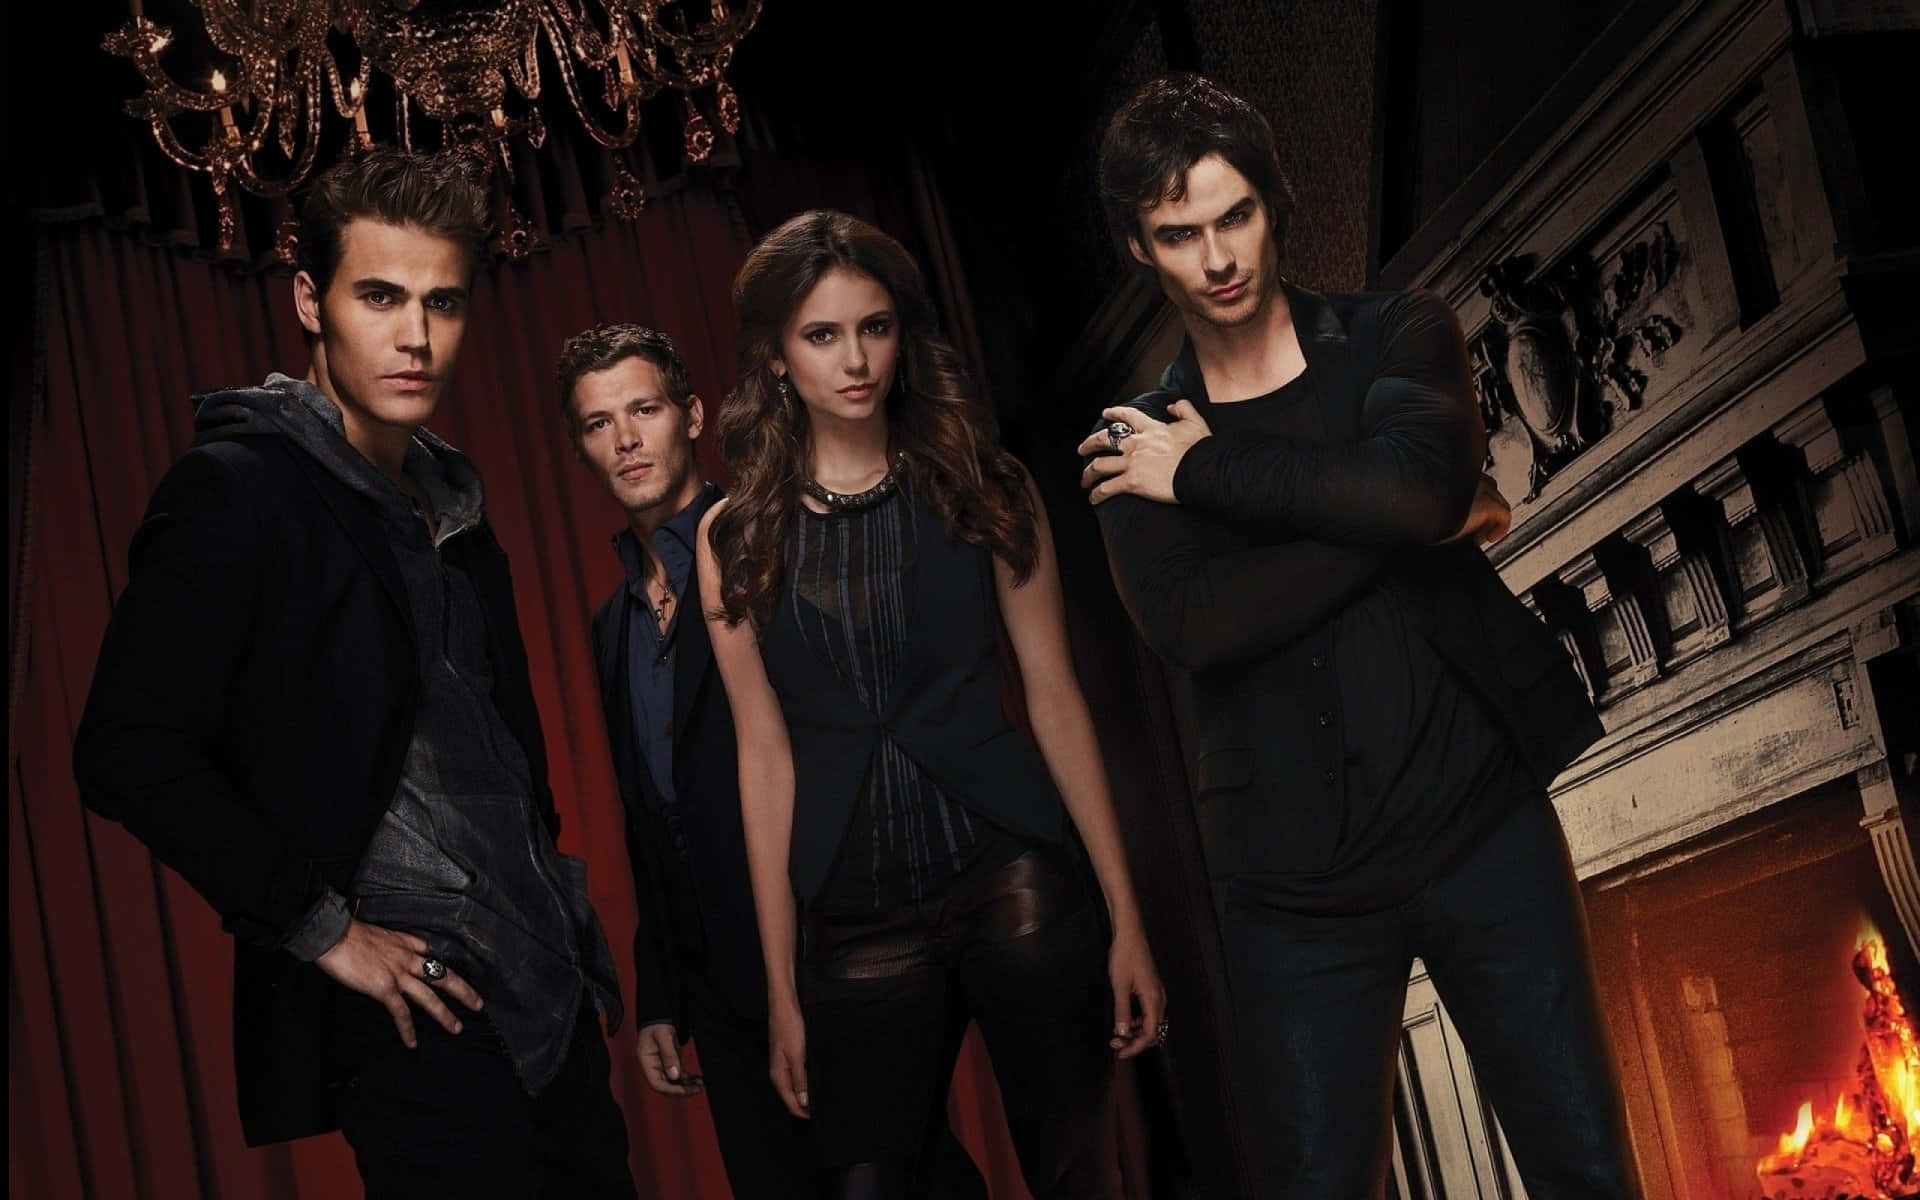 Enjoy The Vampire Diaries on your iPhone Wallpaper